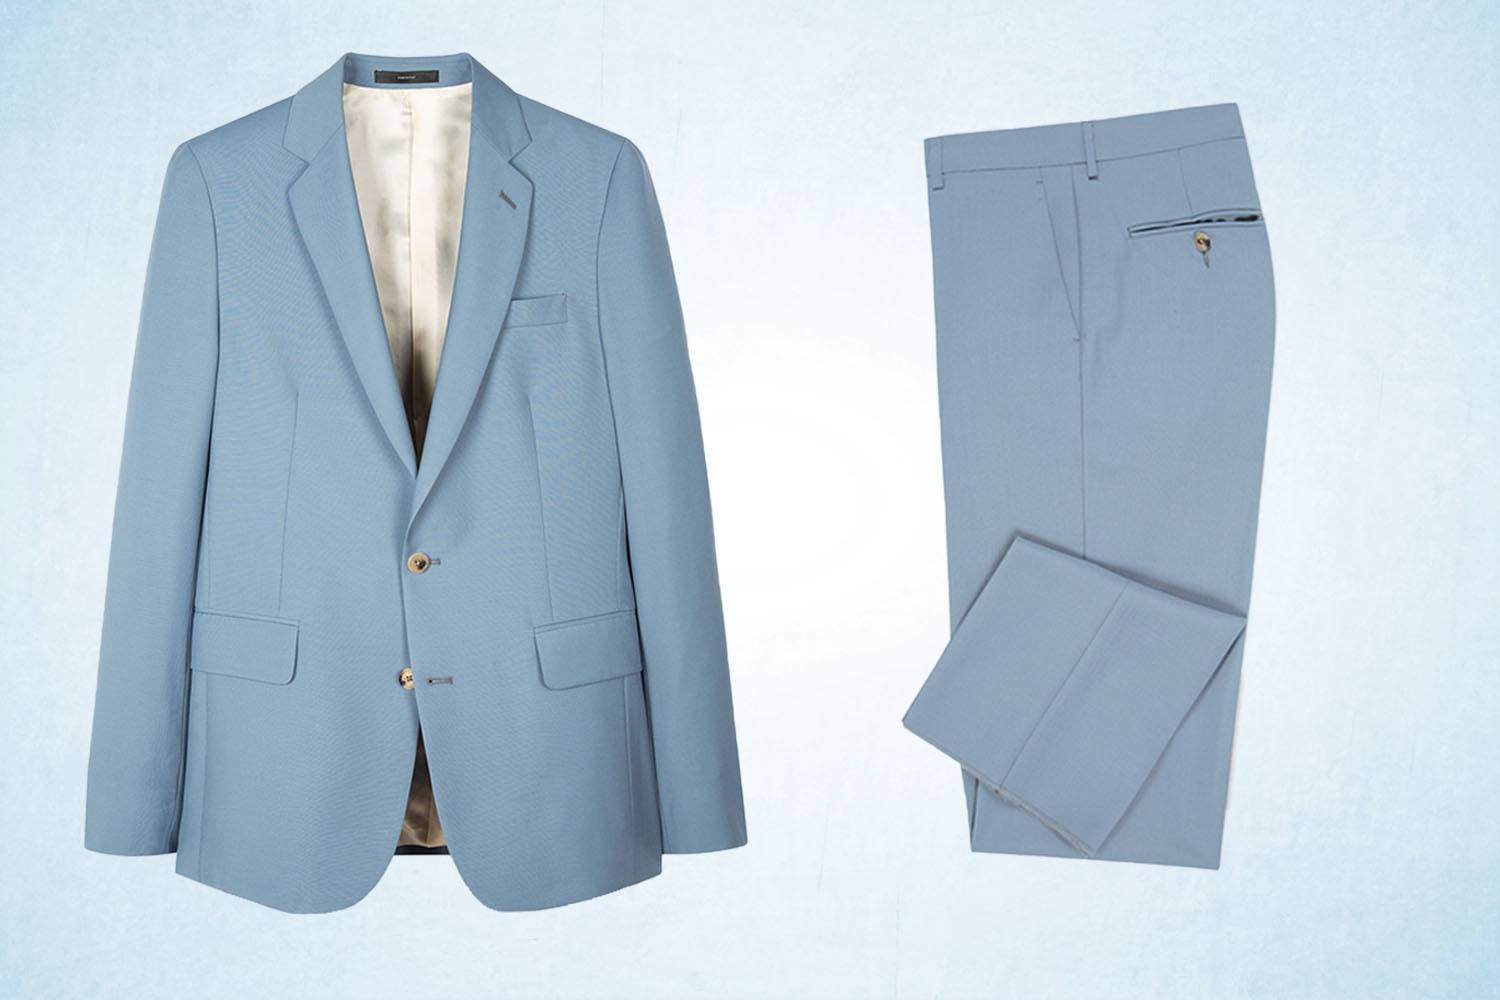 a ice blue, single-breasted suit jacket and pants from Paul Smith on a ice-blue background